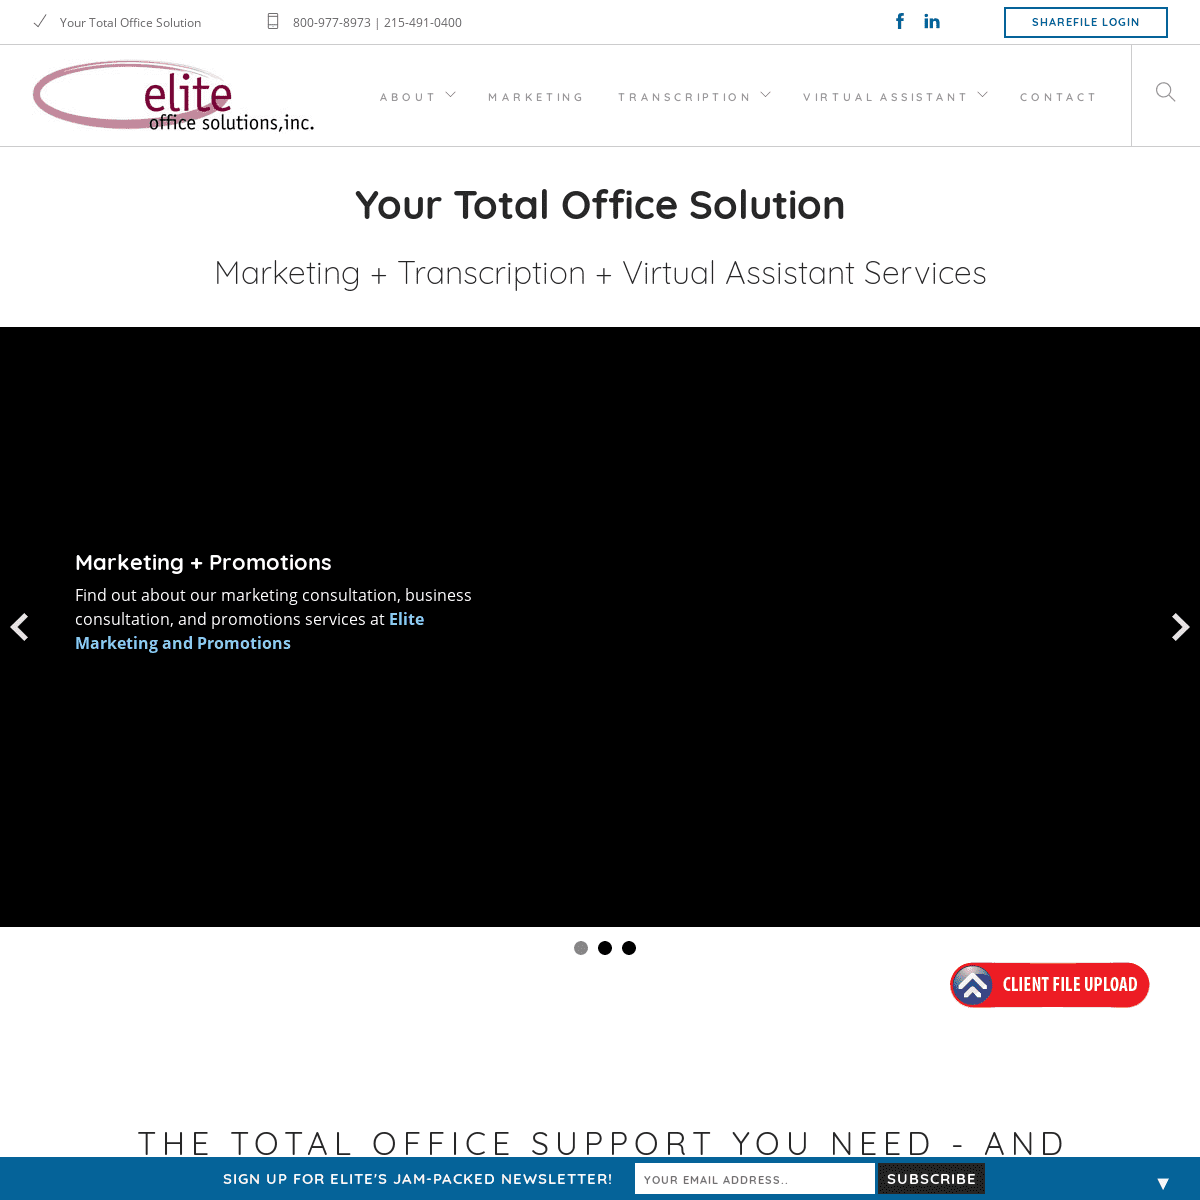 A complete backup of eliteofficesolutions.com